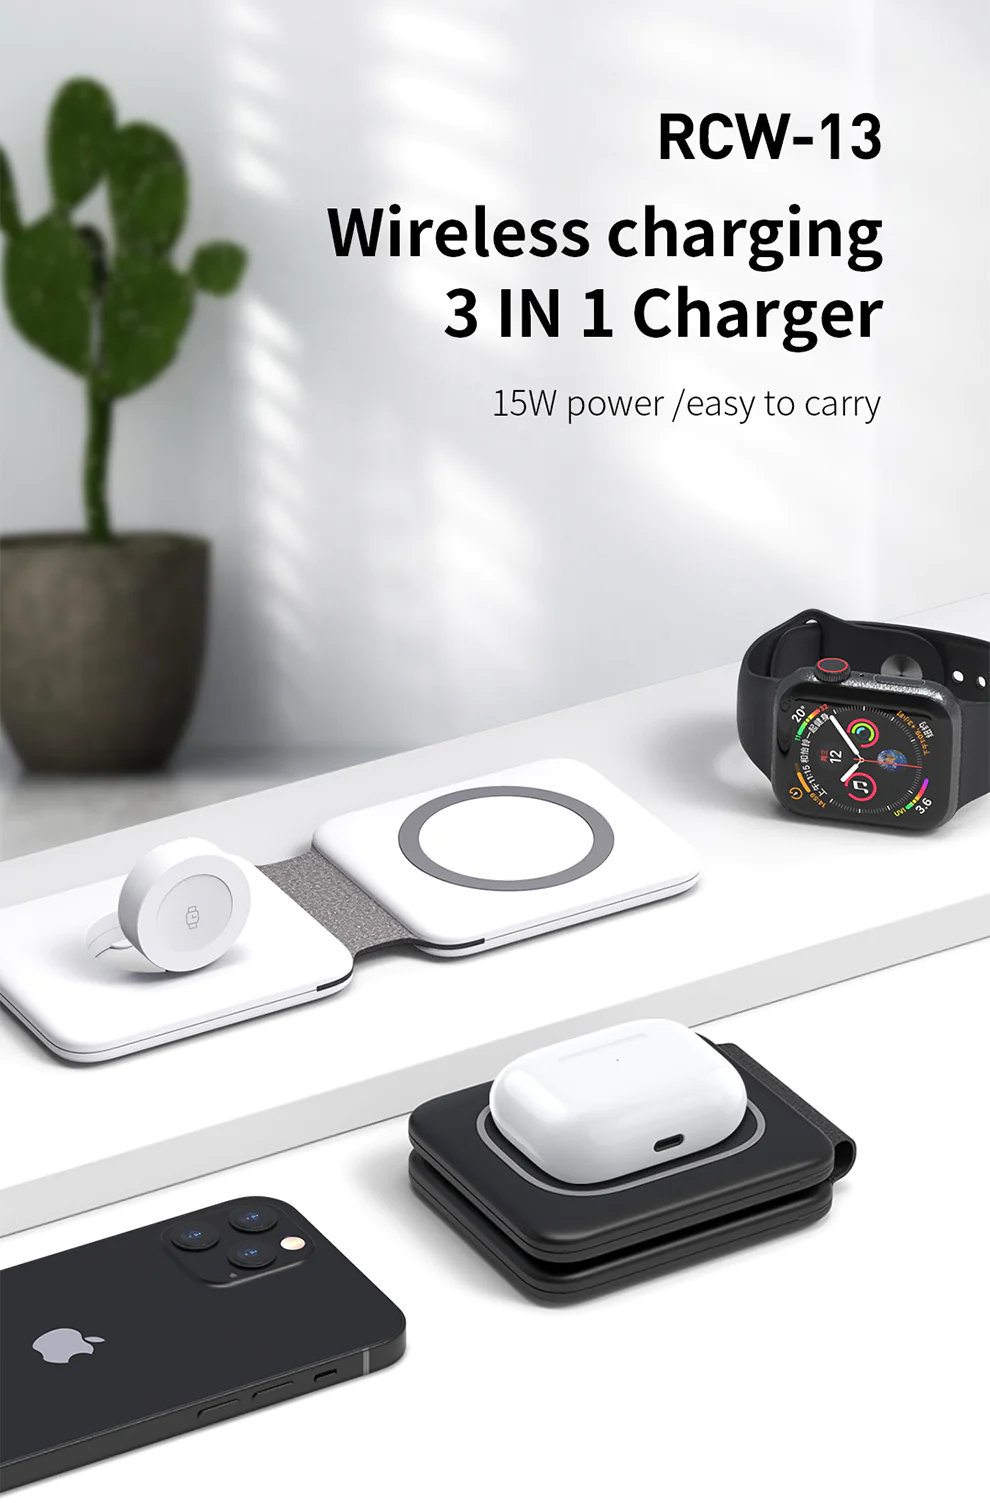 Recci Rcw 13 Wireless 15w Charger 3 In 1 (2)